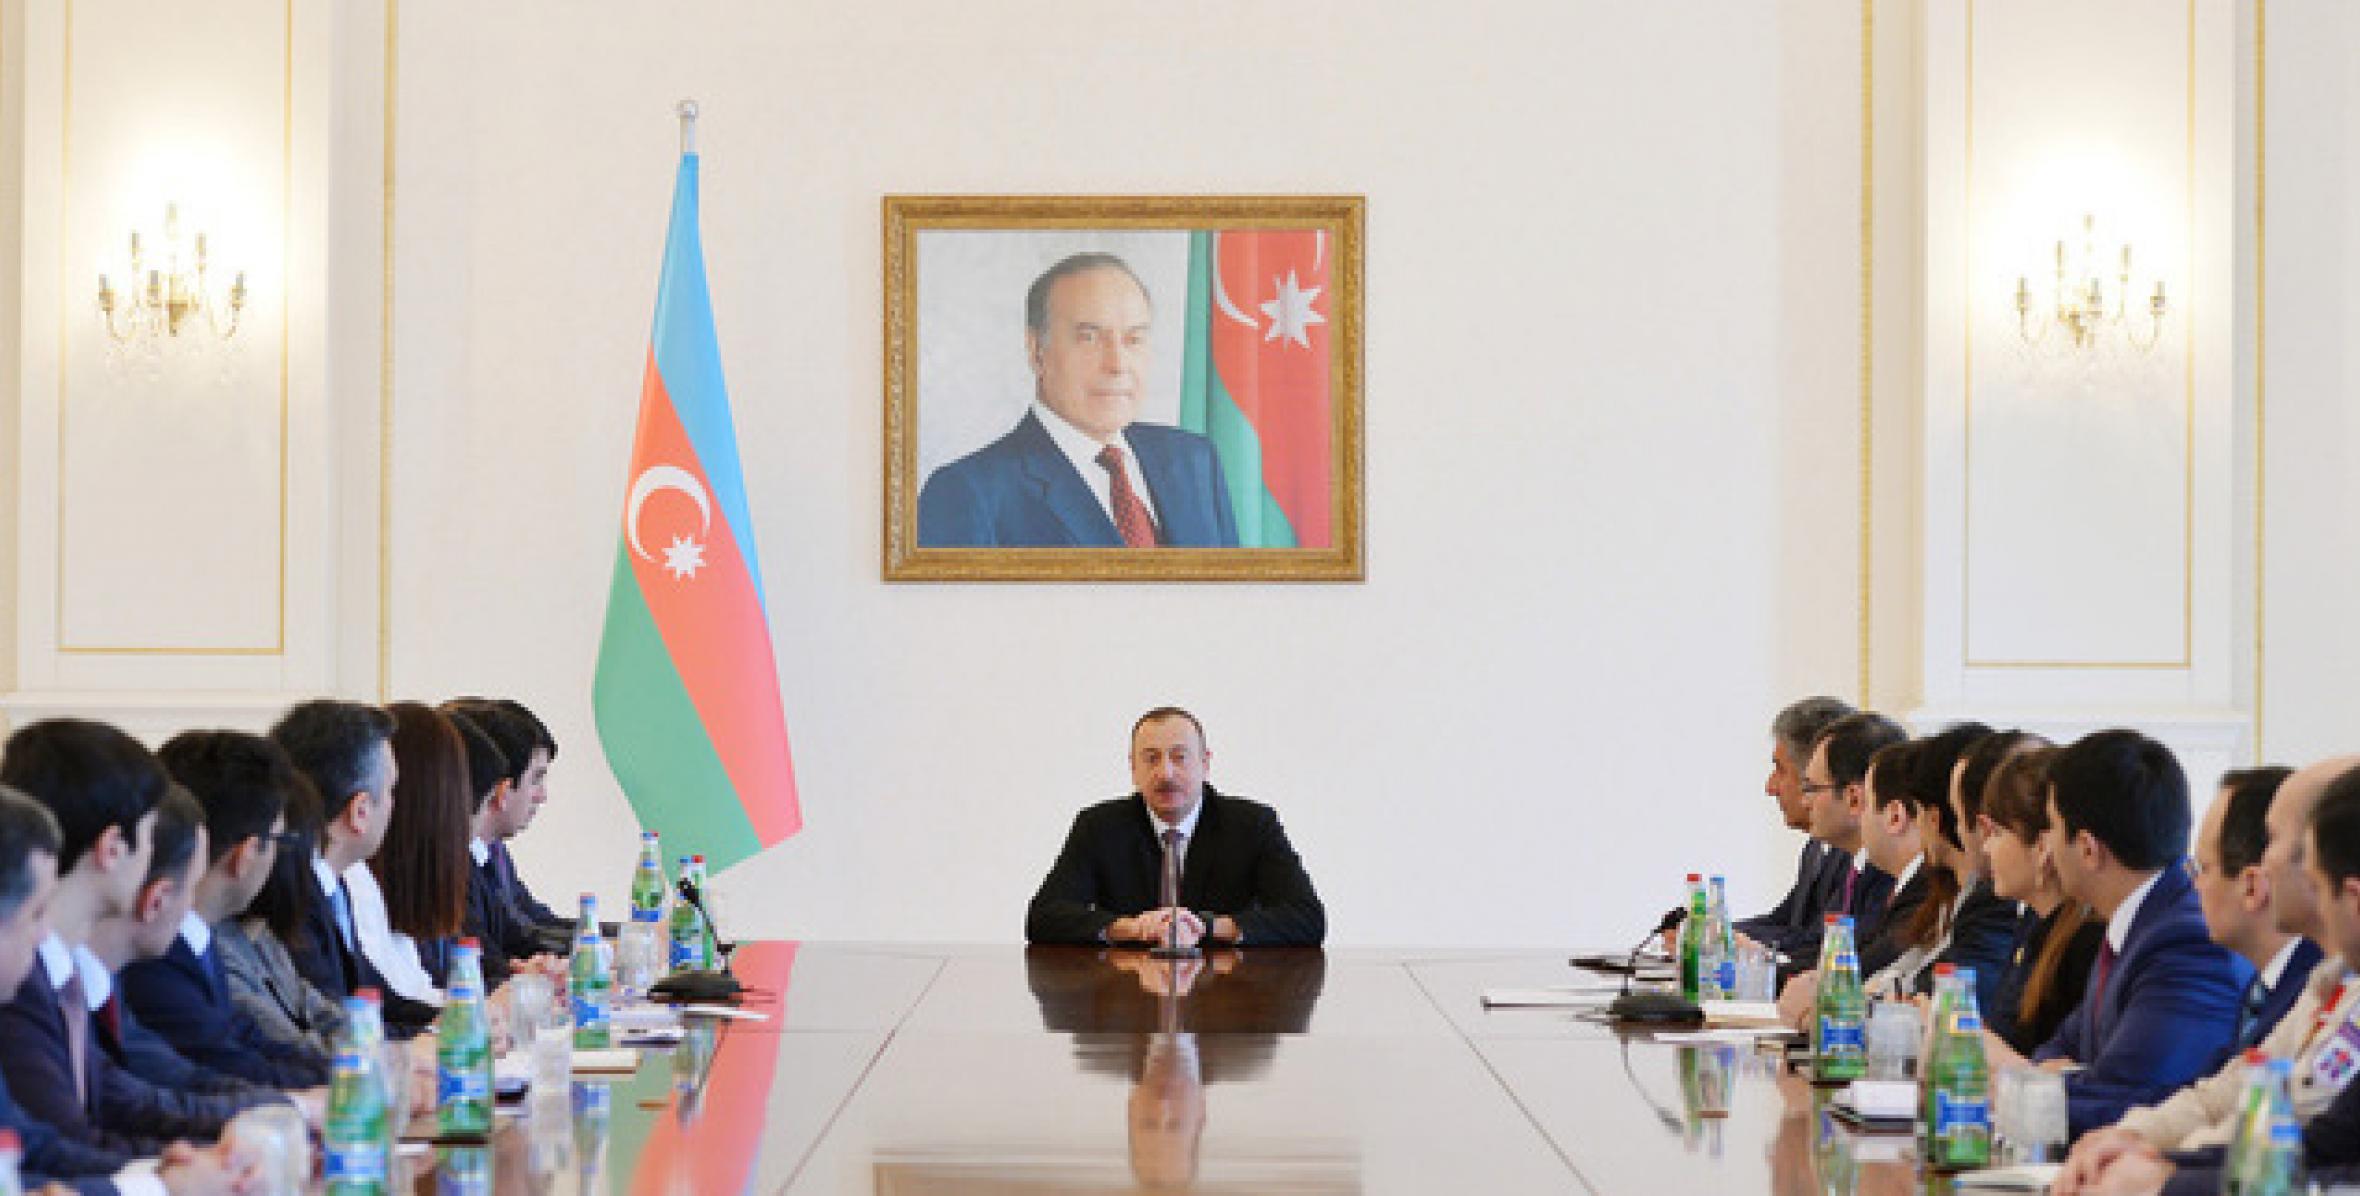 Speech by Ilham Aliyev at the meeting with a group of Azerbaijani youth